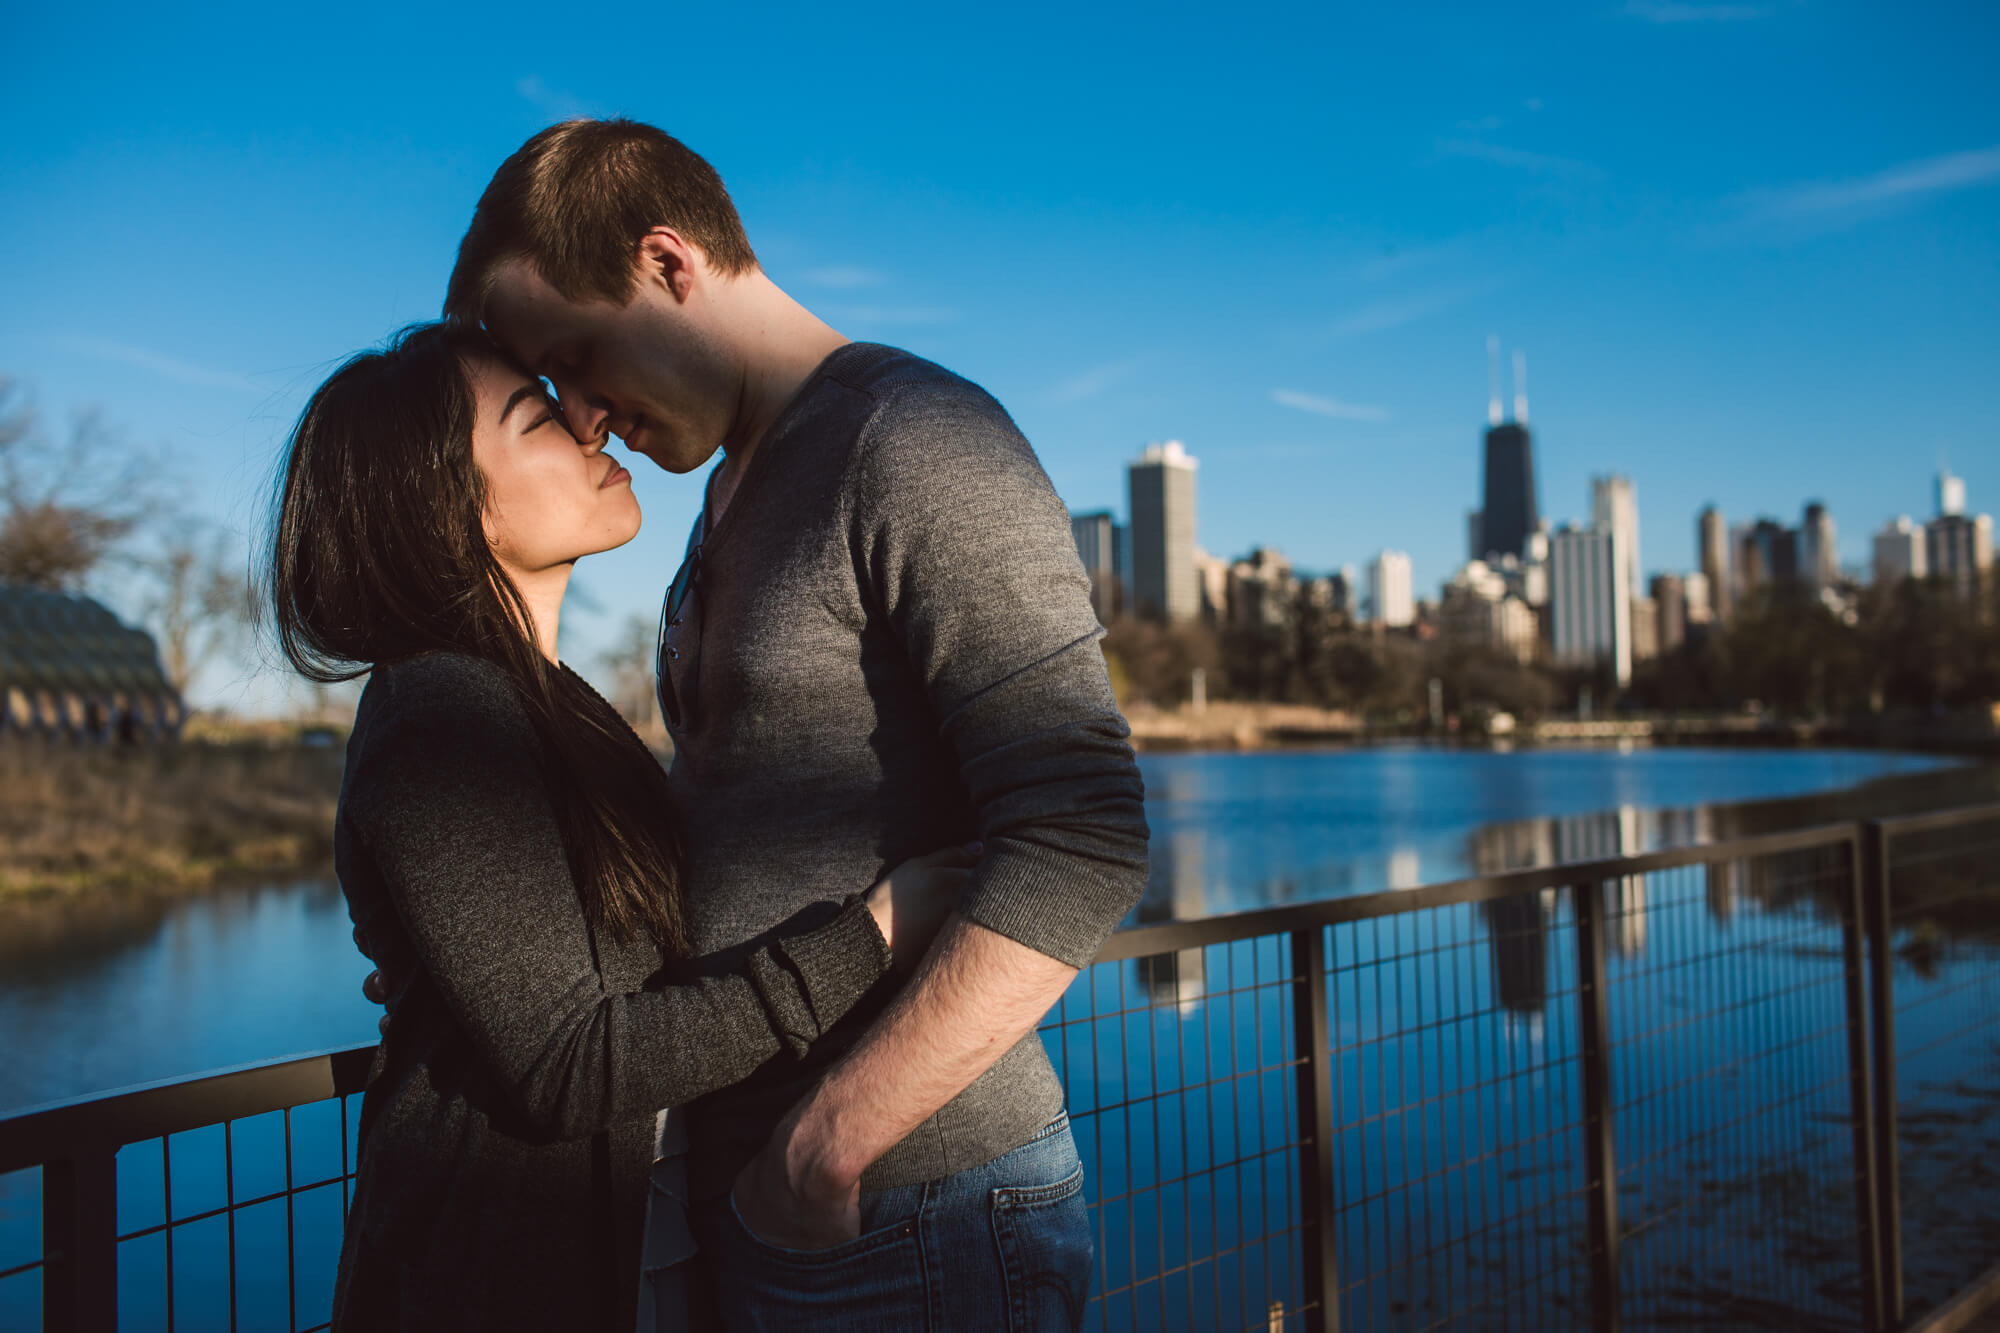 Couple share romantic moment after engagement in Lincoln Park, Chicago